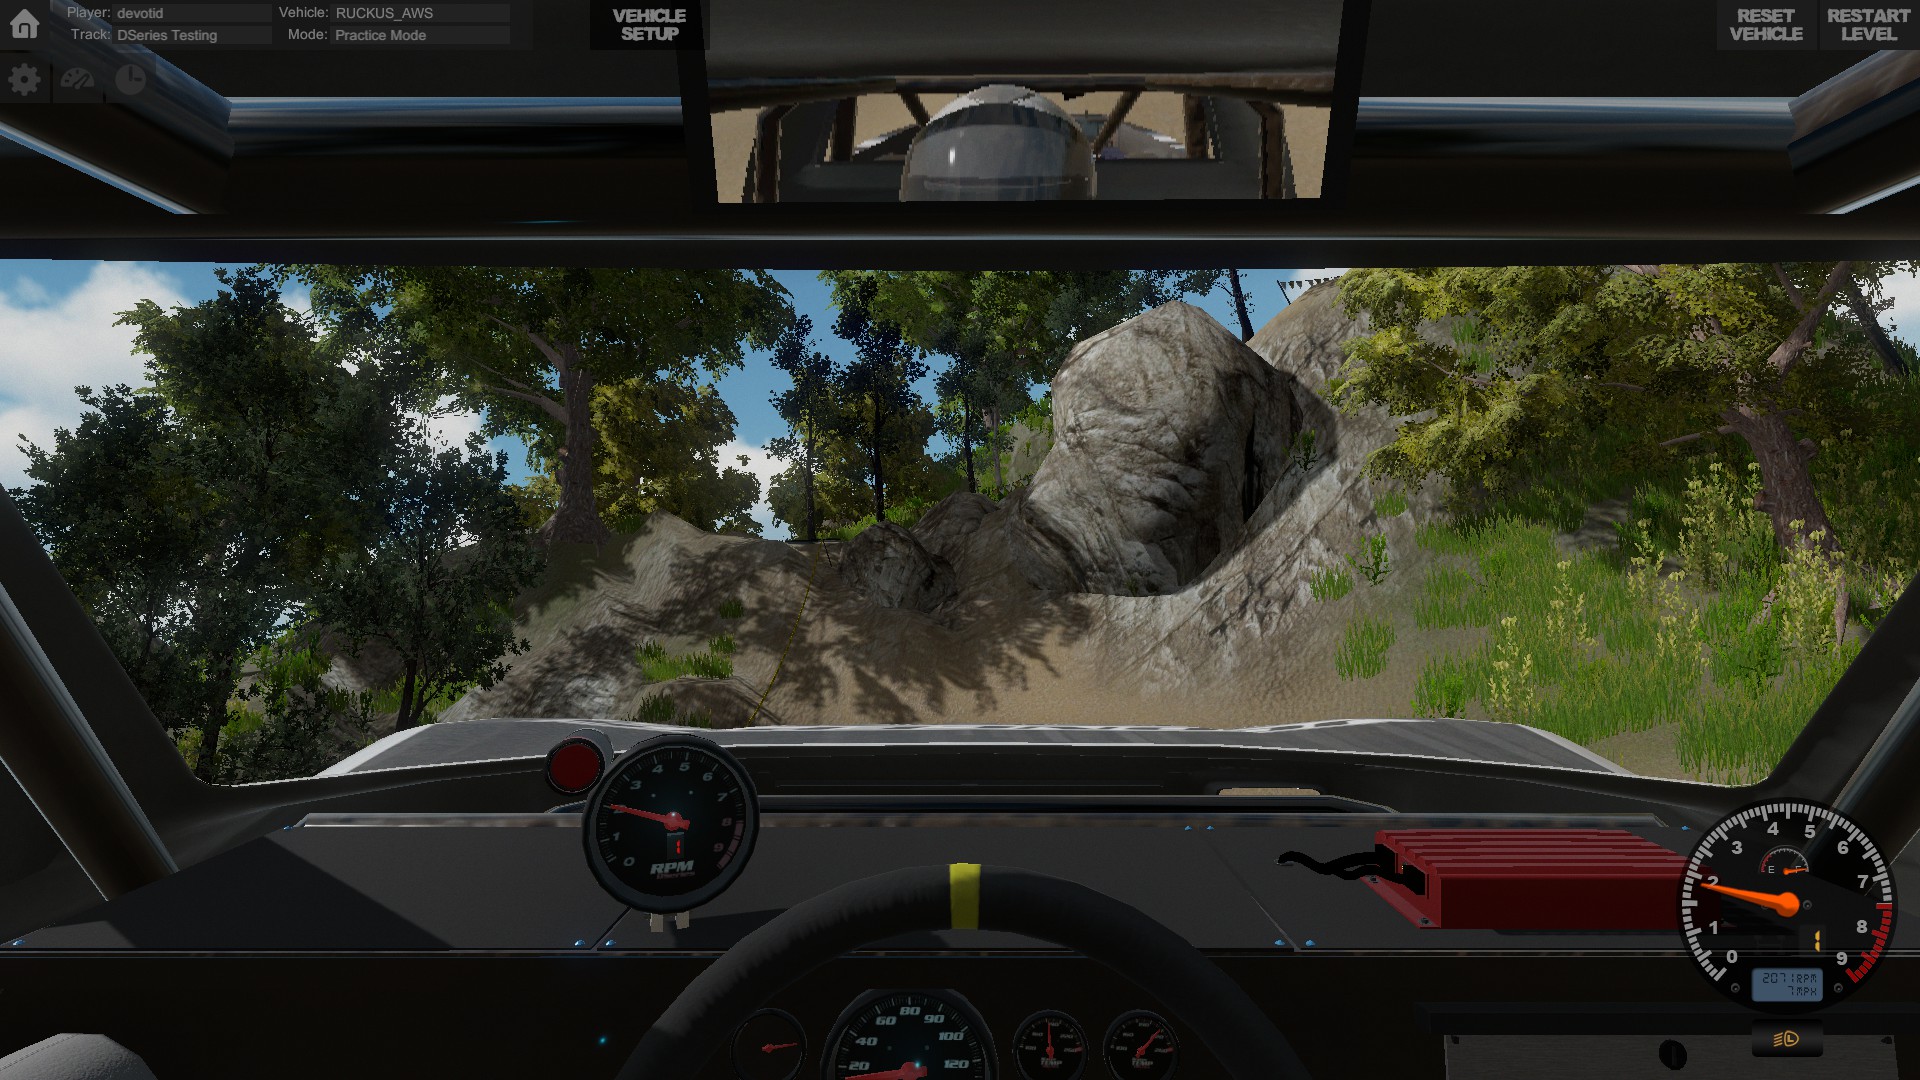 Offroad Vehicle Simulation downloading